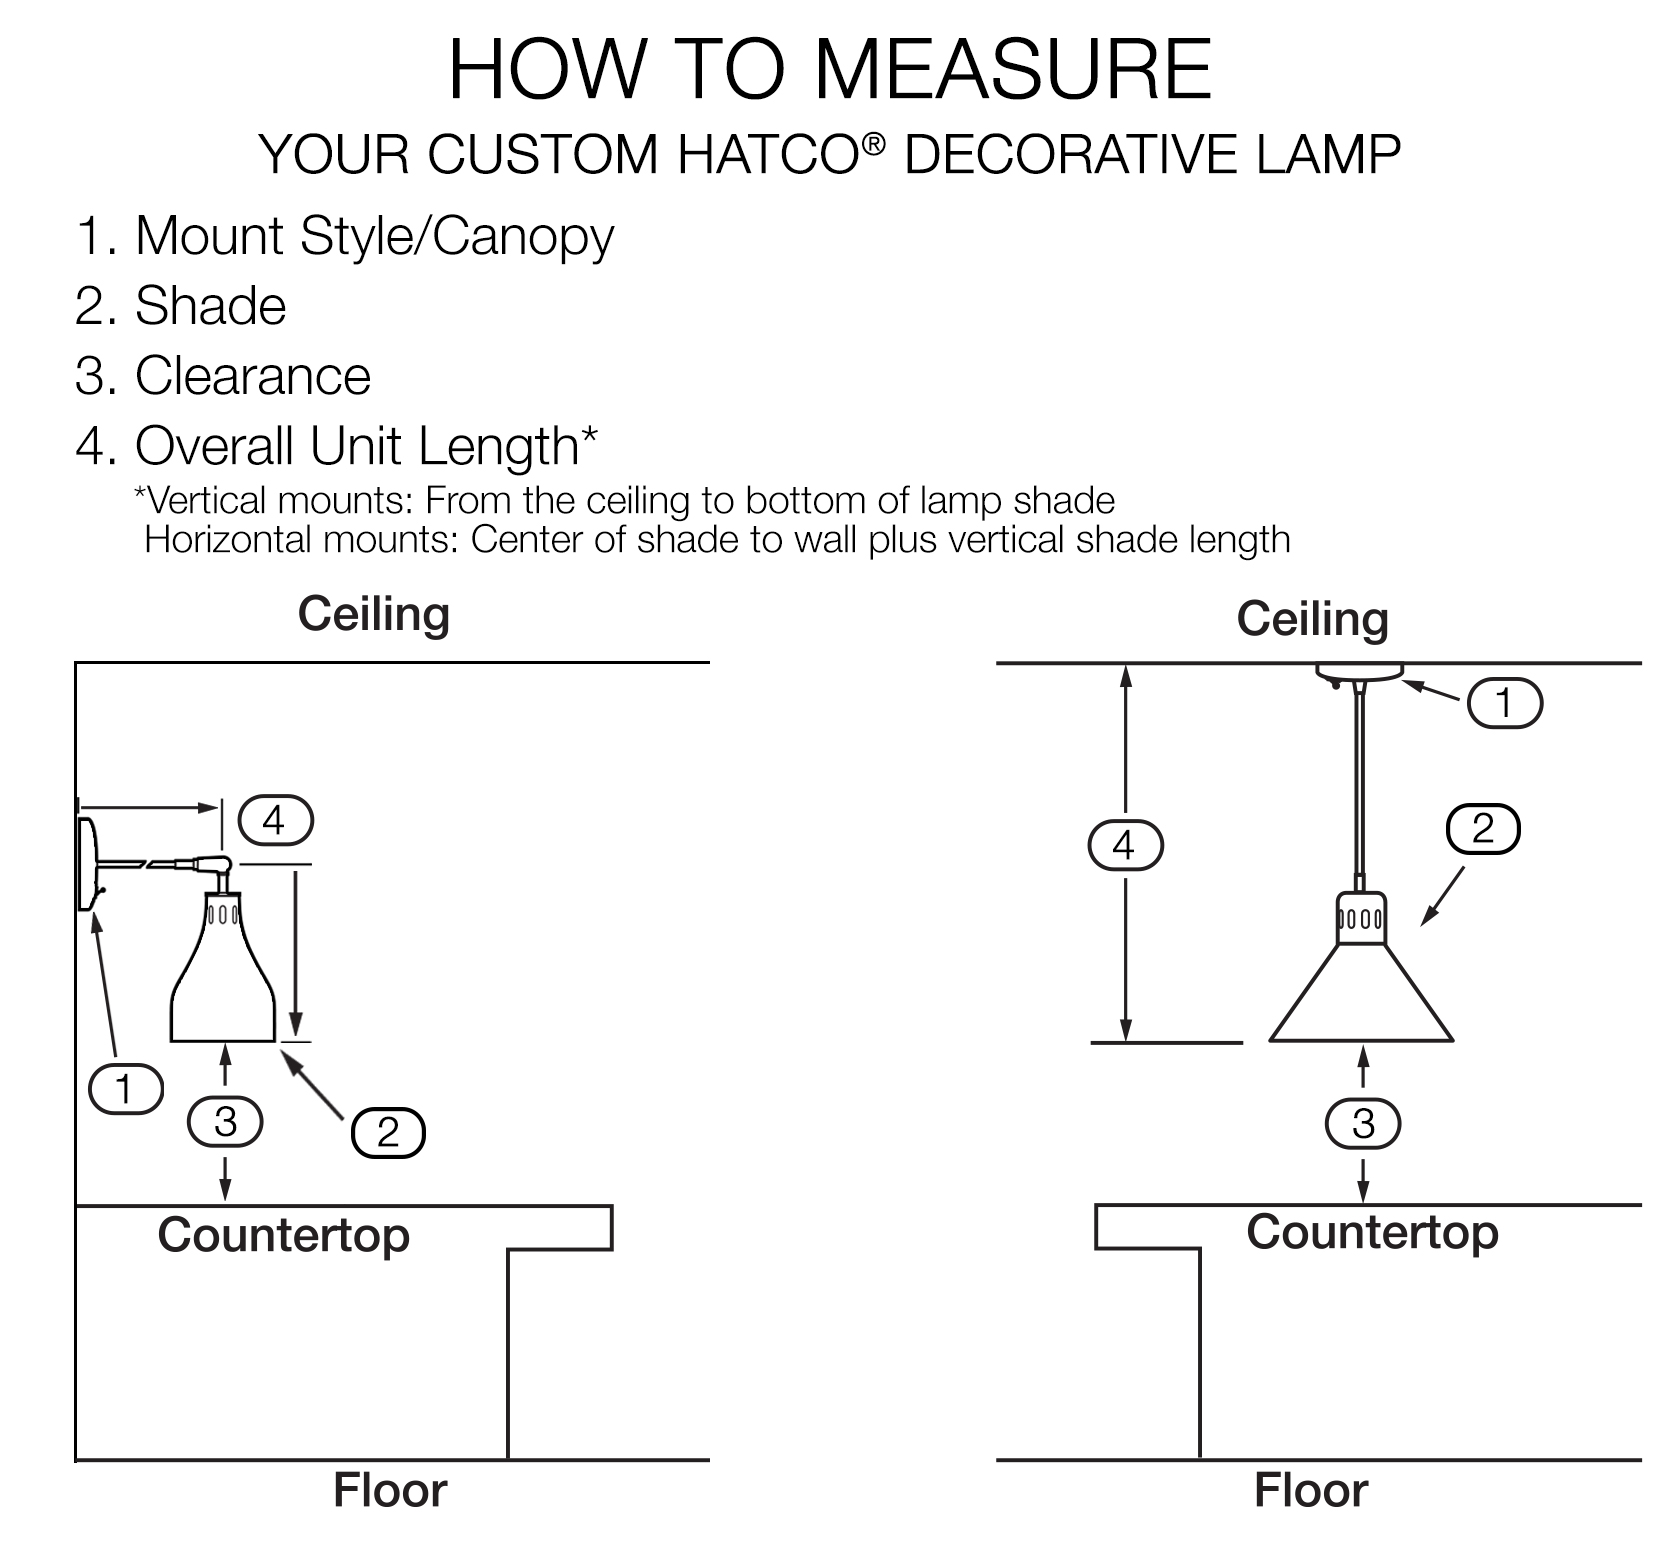 How to Measure a Hatco Decorative Lamp